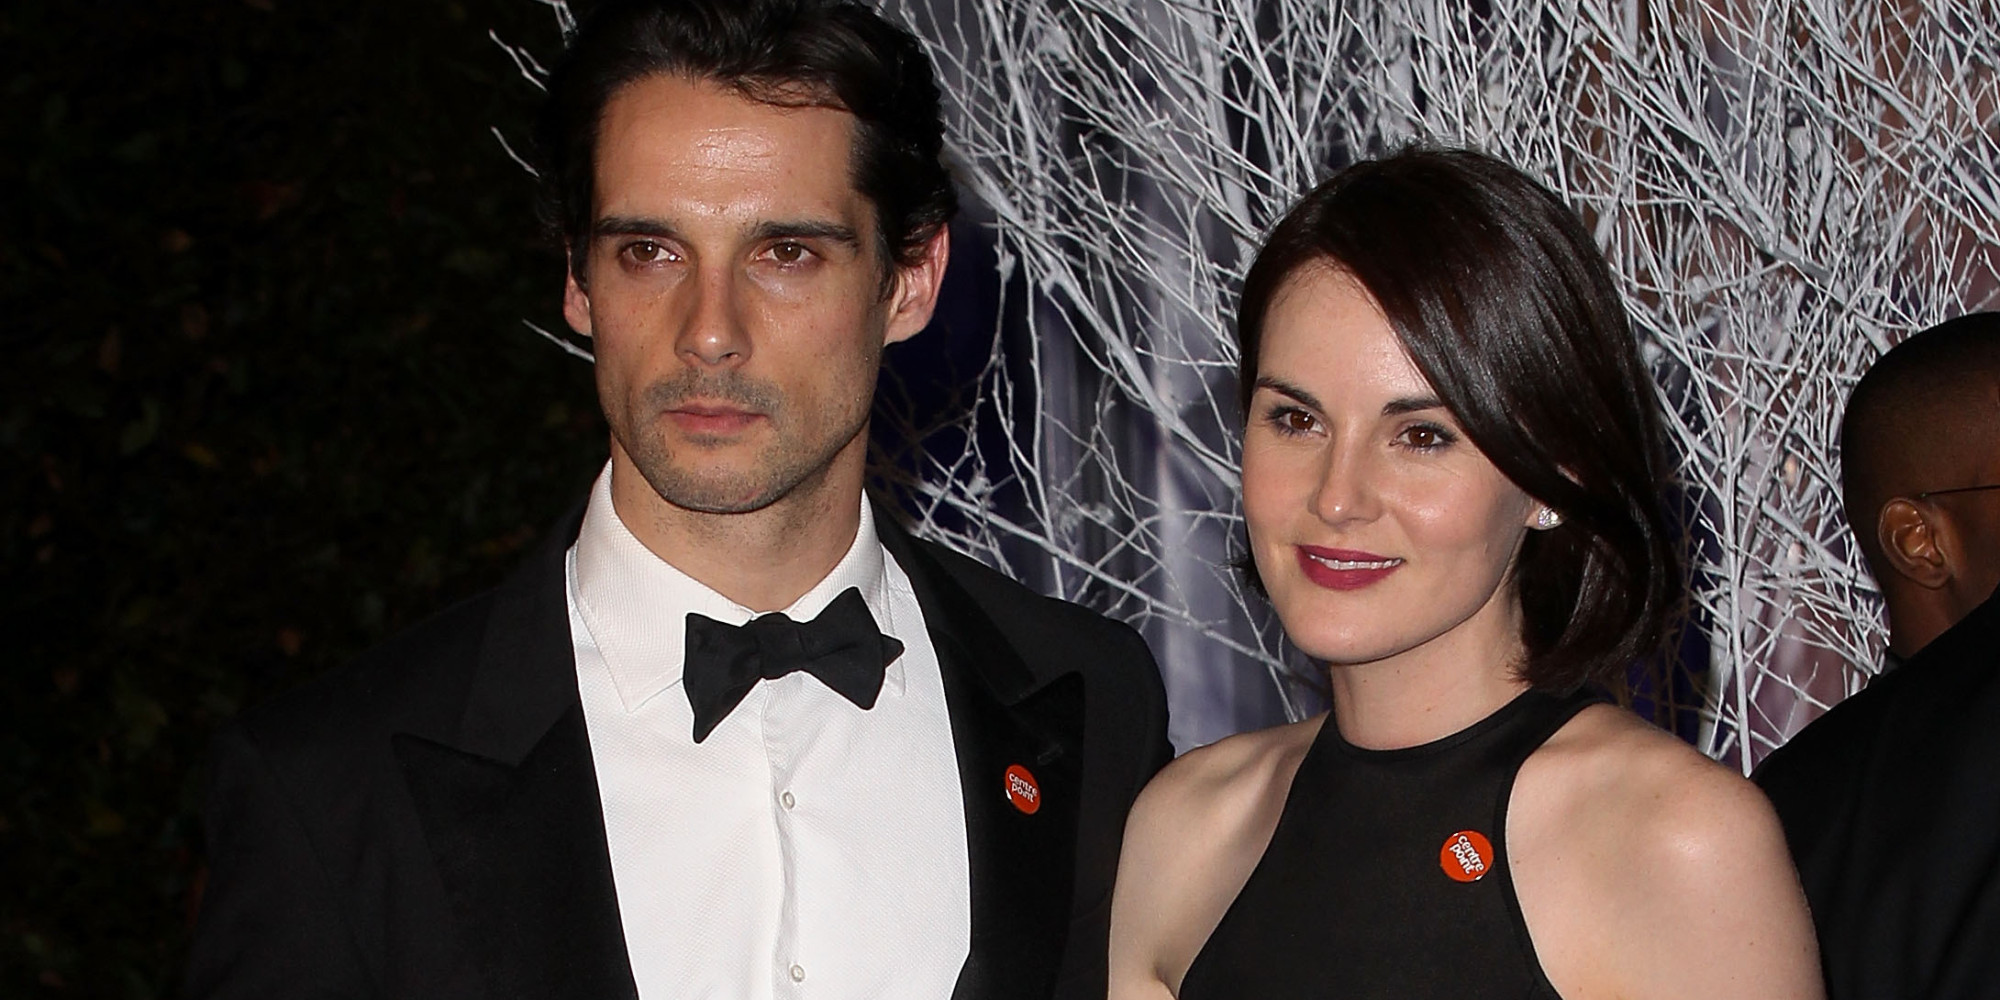 LONDON, ENGLAND - NOVEMBER 26: Michelle Dockery (R) and boyfriend John Dineen attend the Winter Whites Gala in aid of Centrepoint at Kensington Palace on November 26, 2013 in London, England. (Photo by Danny Martindale/WireImage)